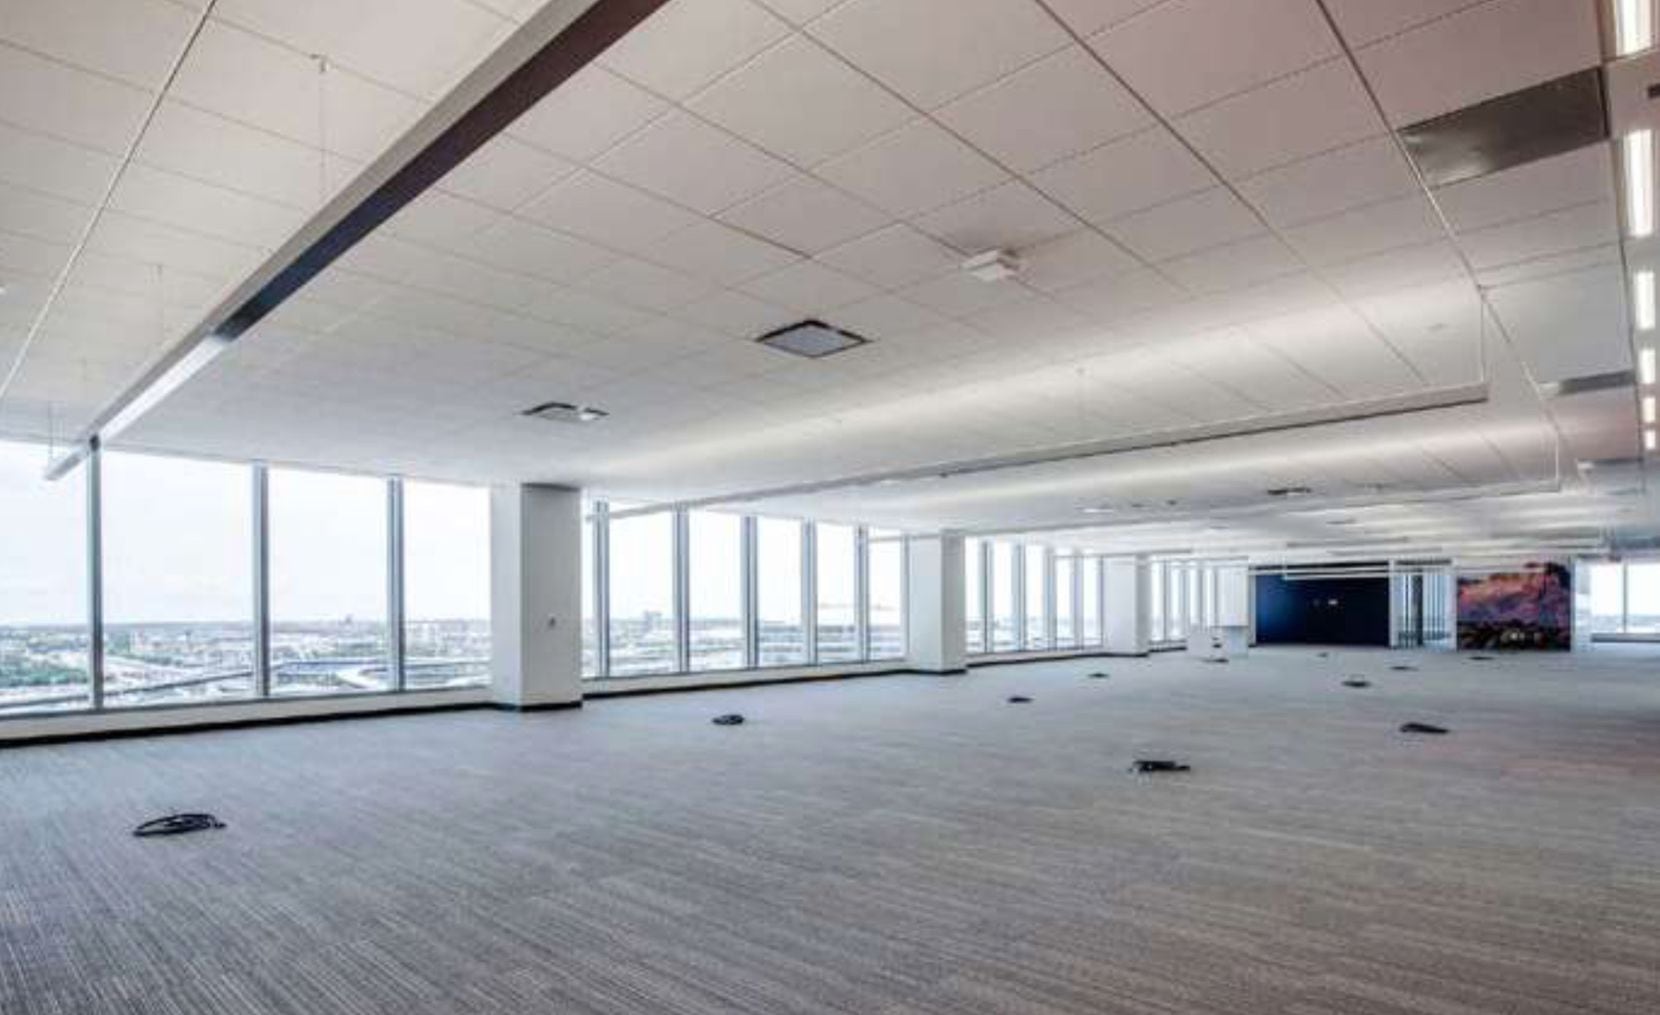 Liberty Mutual is seeking to rent out seven empty floors in one of the high-rises.